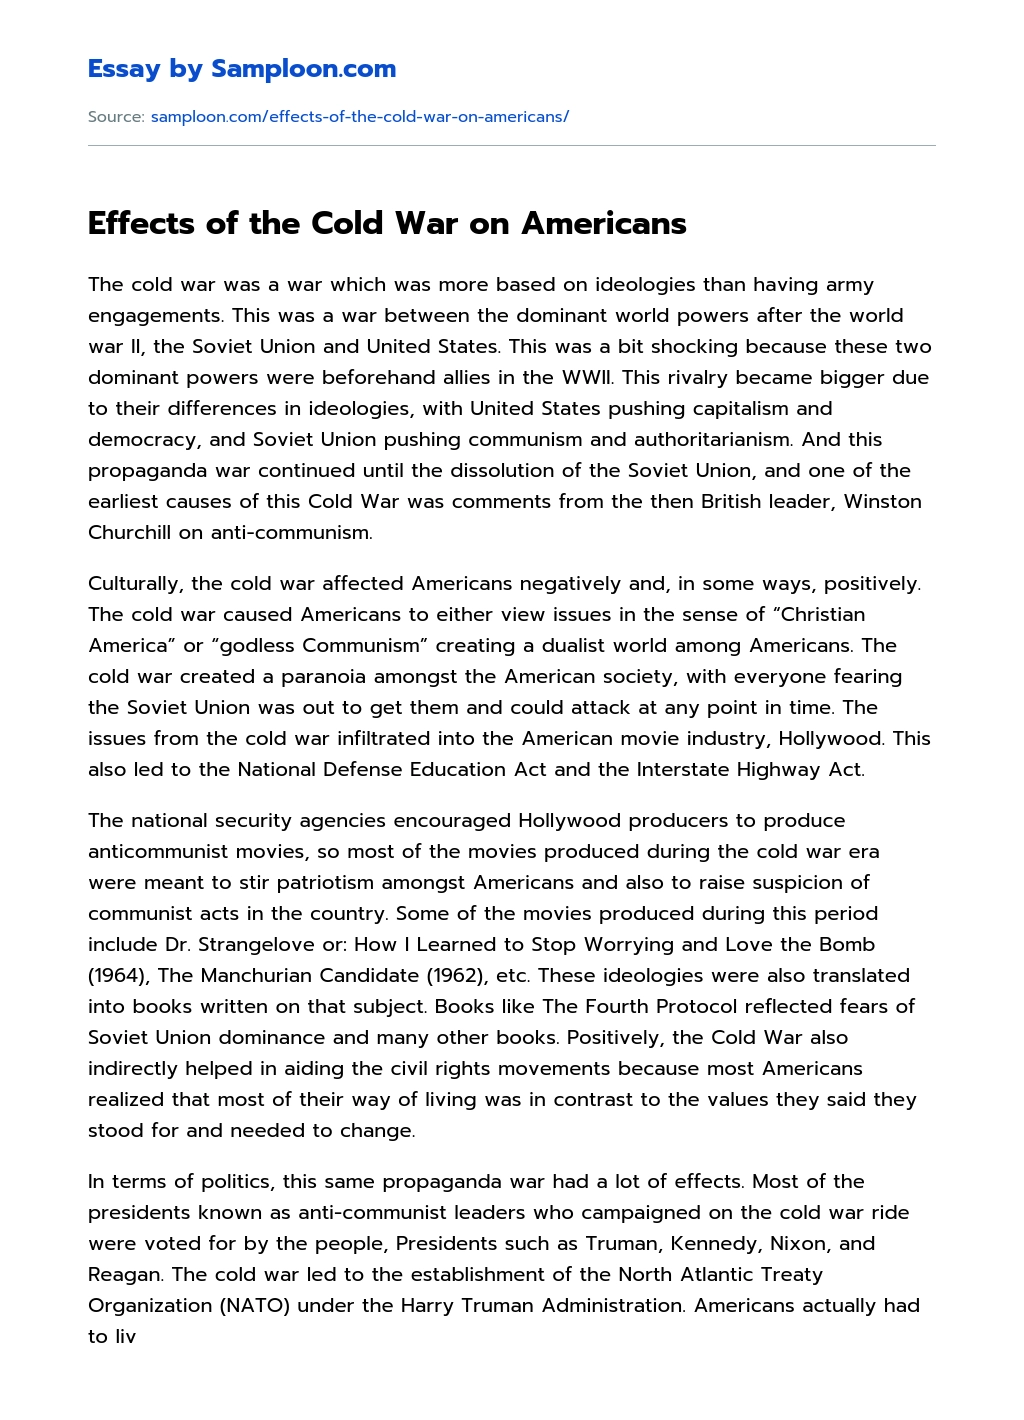 Effects of the Cold War on Americans essay